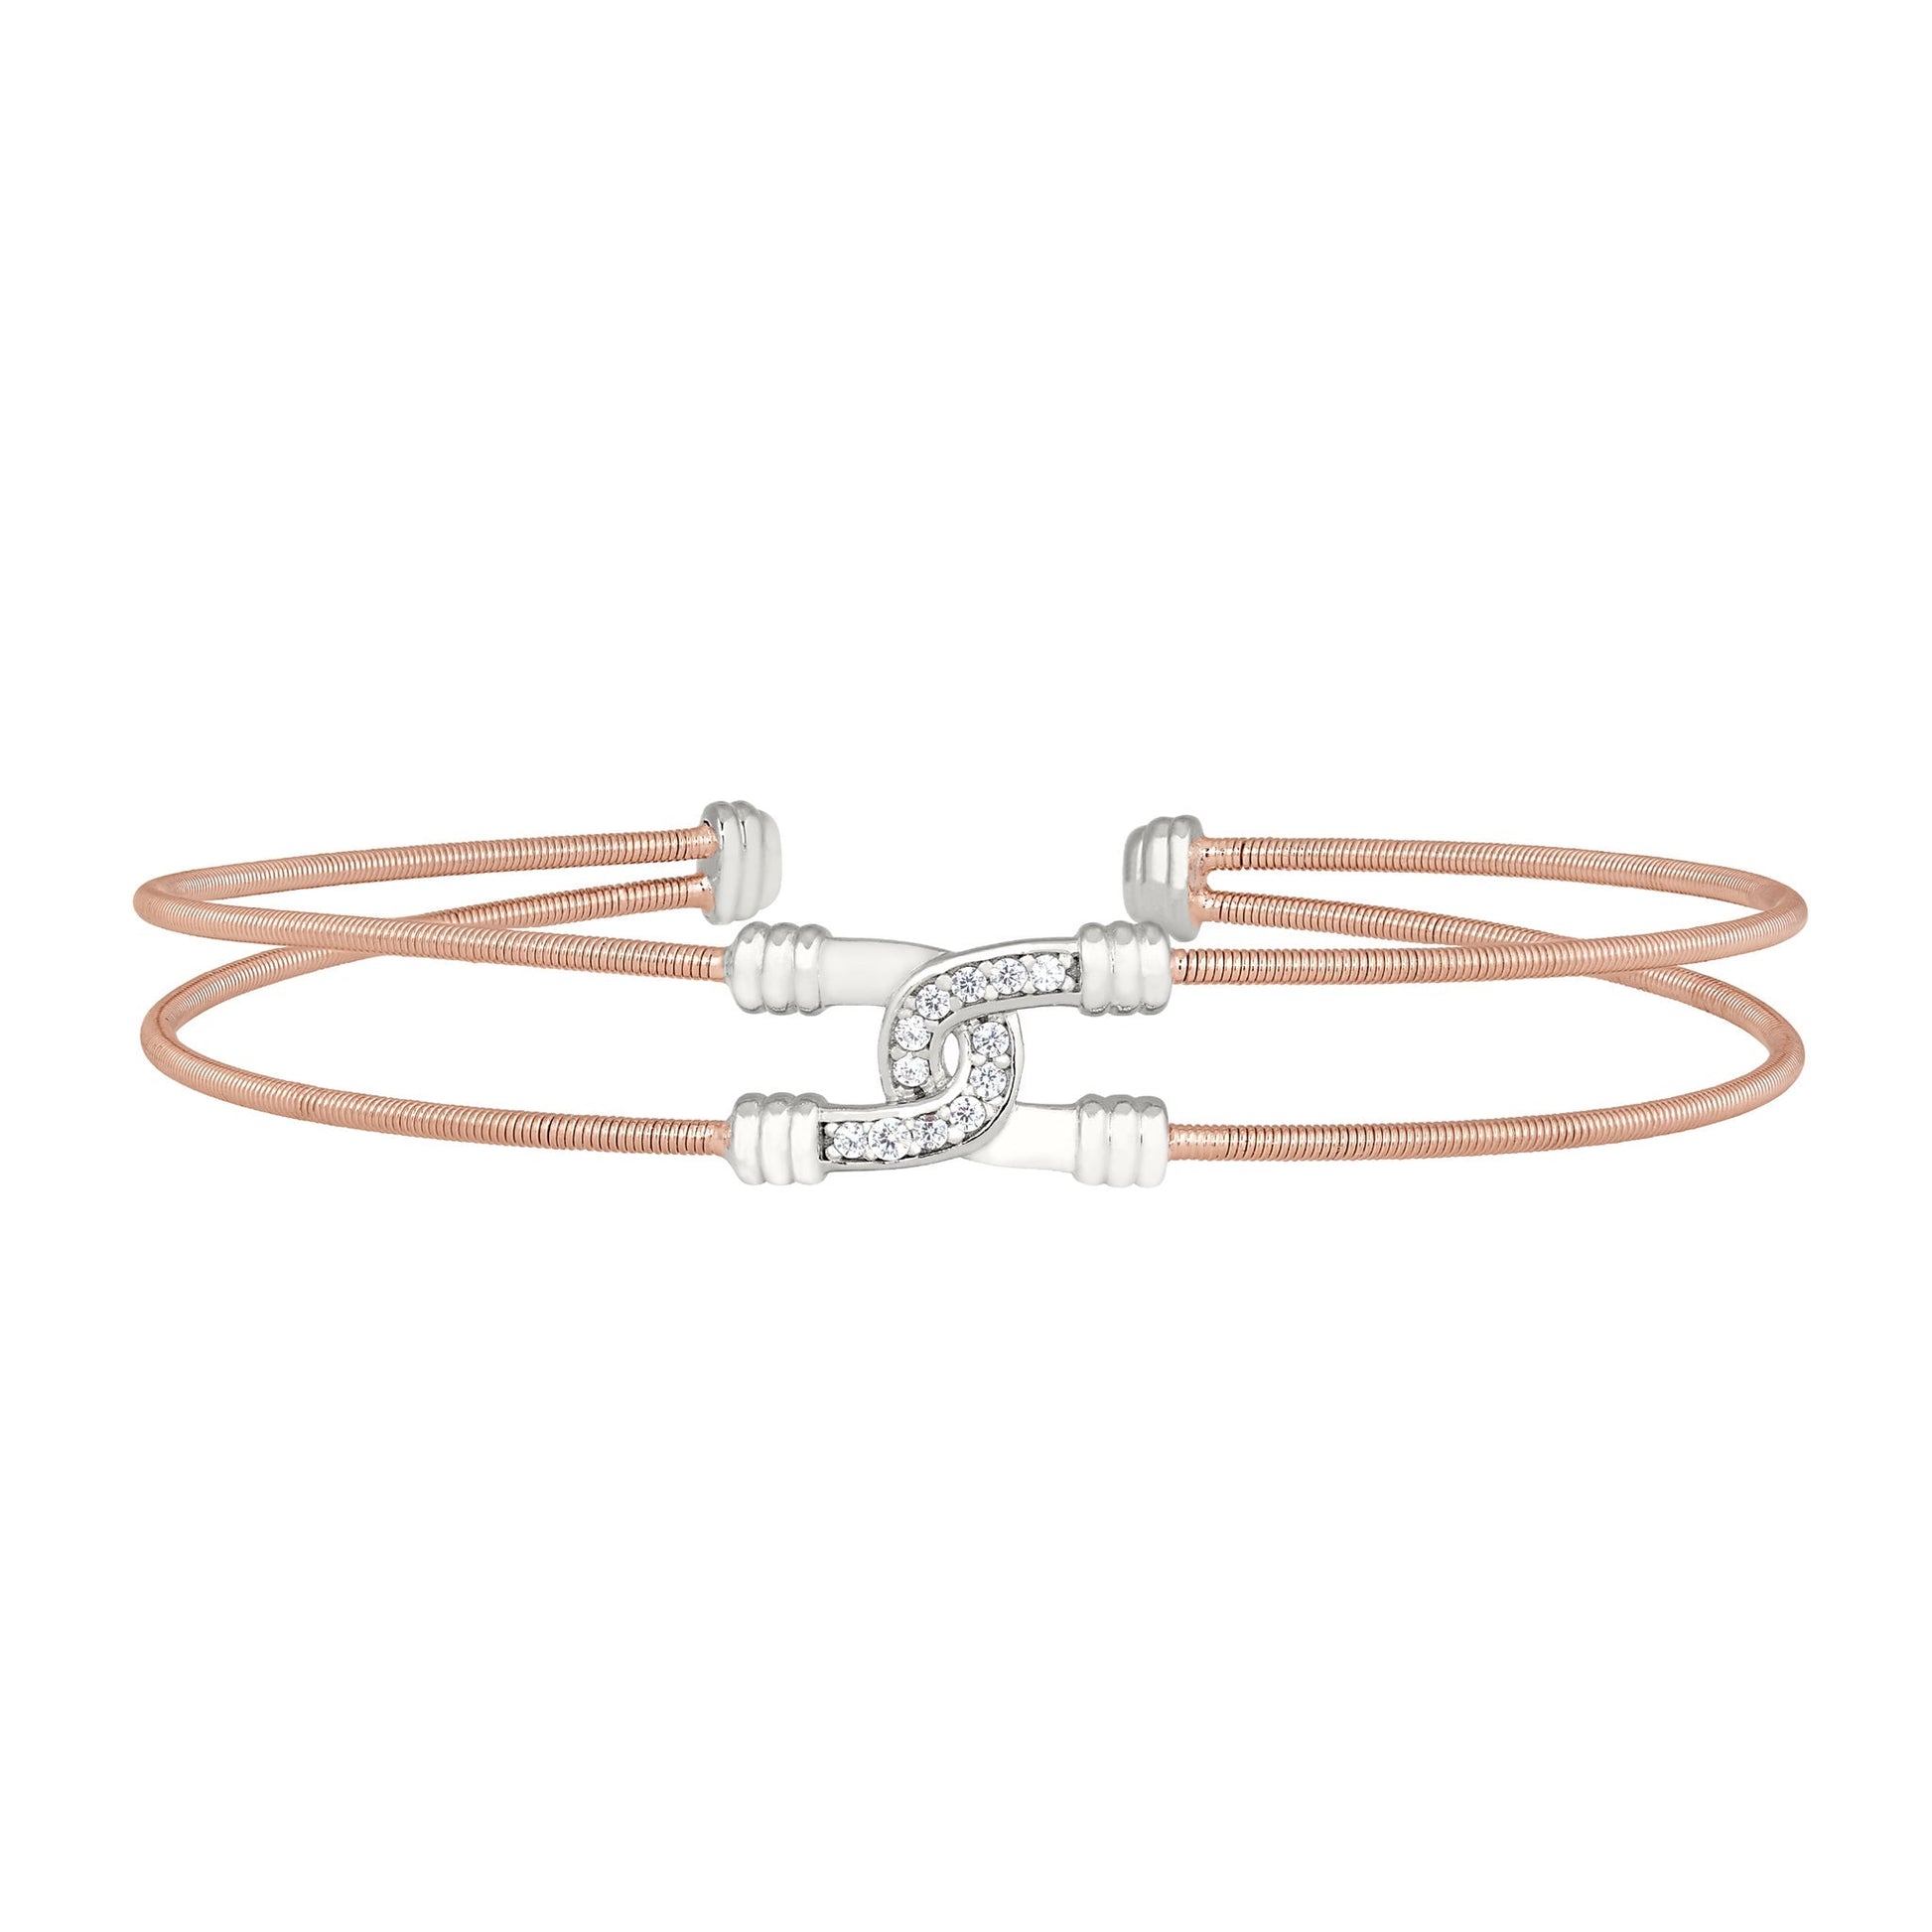 A two cable bracelet with intertwined simulated diamond double arcs displayed on a neutral white background.